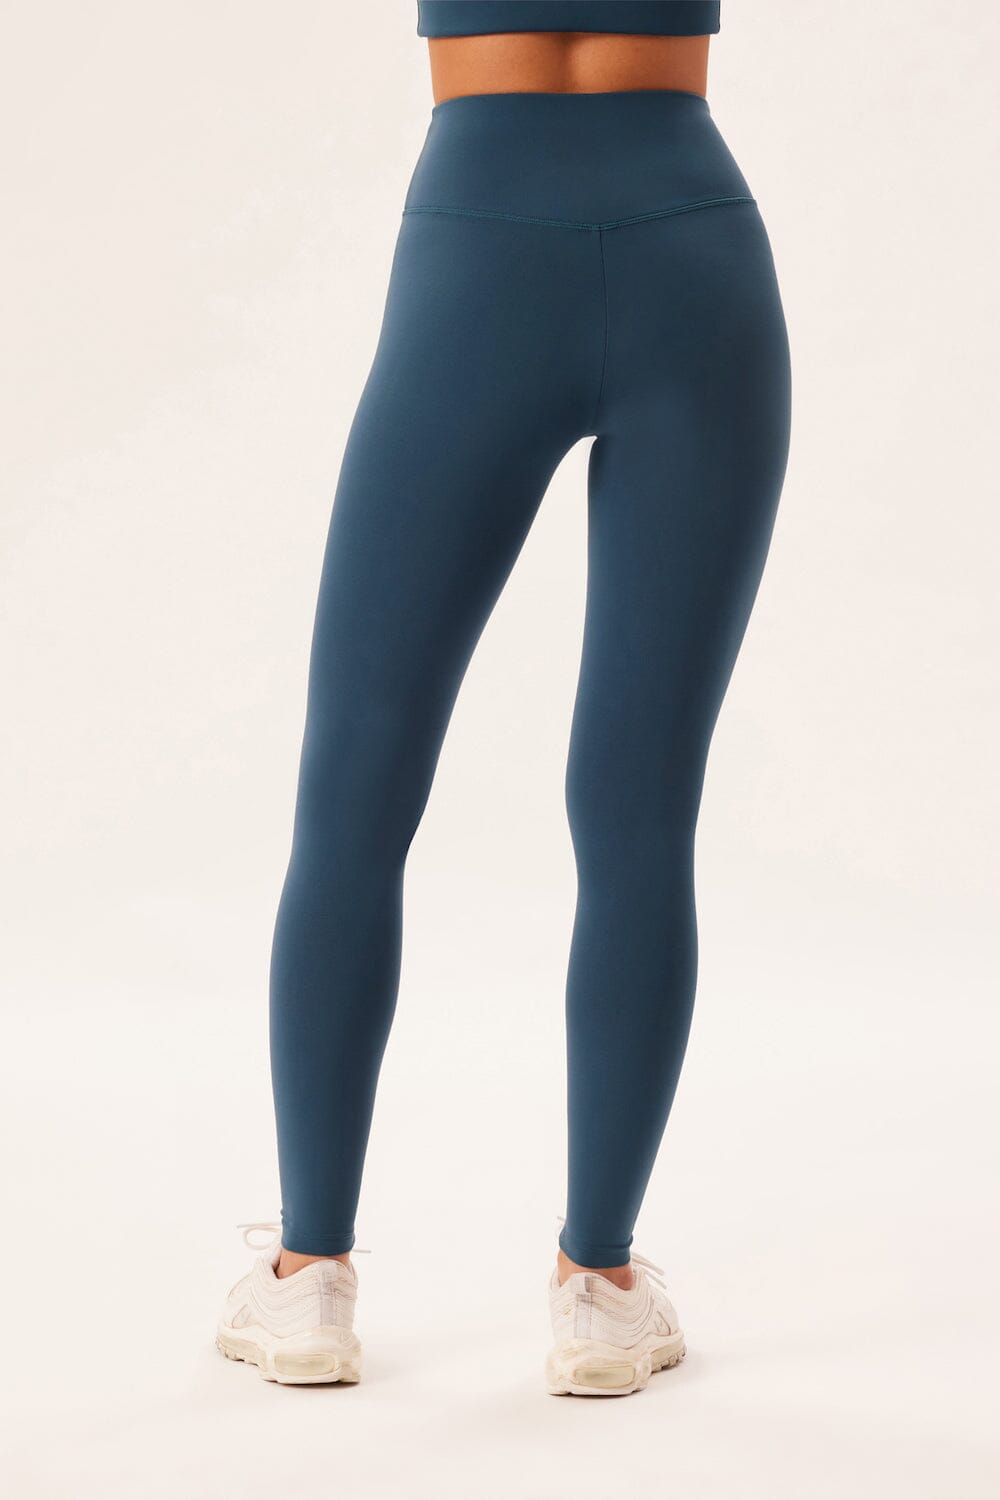 Girlfriend Collective LUXE Leggings - Recycled PET Lago XXL Pants